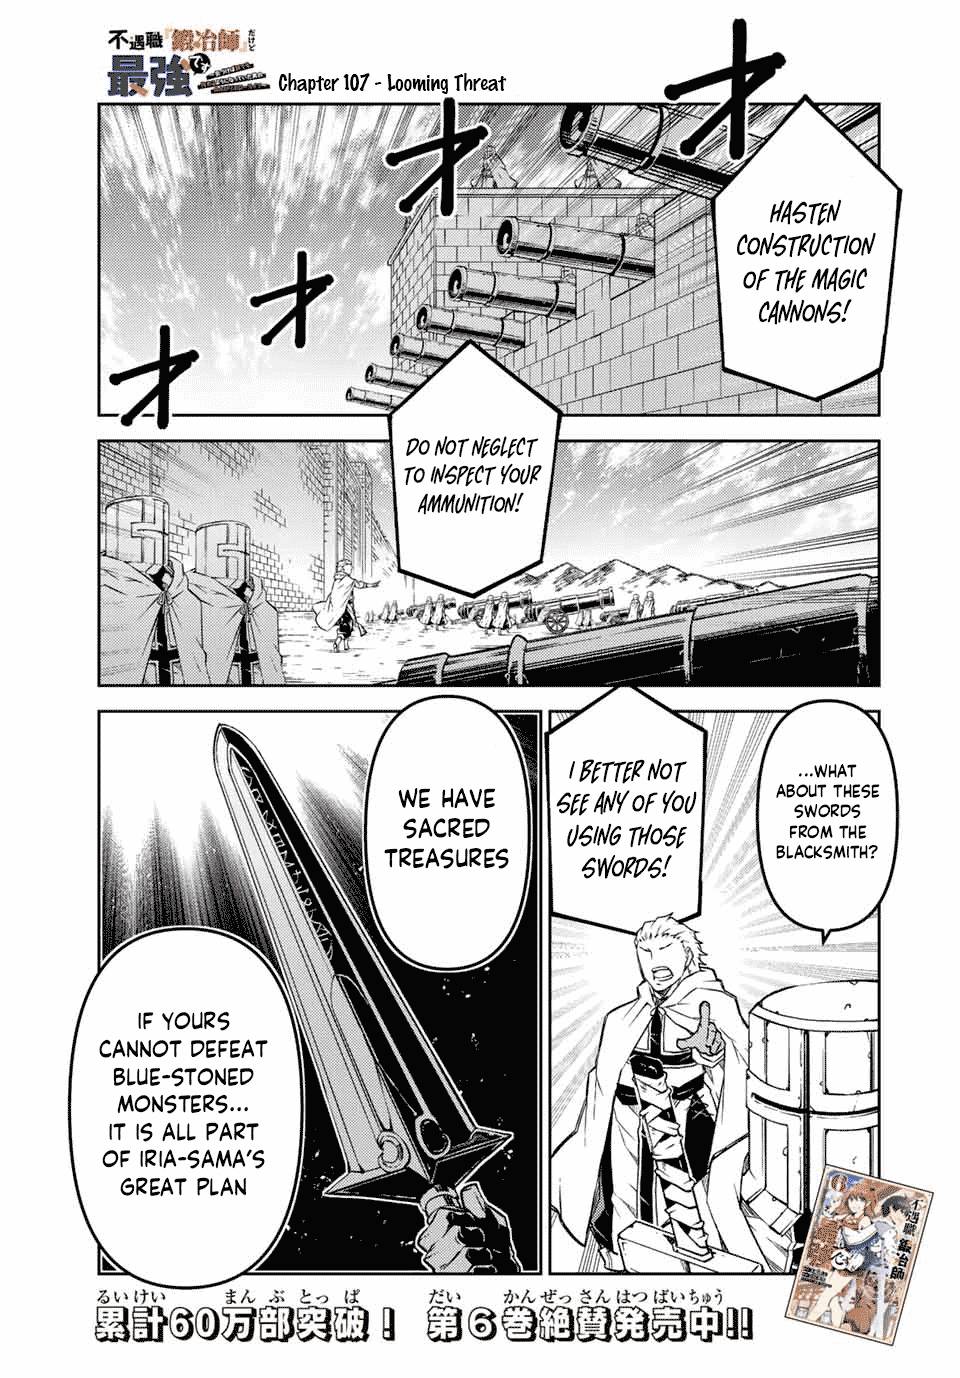 Read The Weakest Occupation blacksmith, But It's Actually The Strongest  Chapter 158: Argo's Wish on Mangakakalot